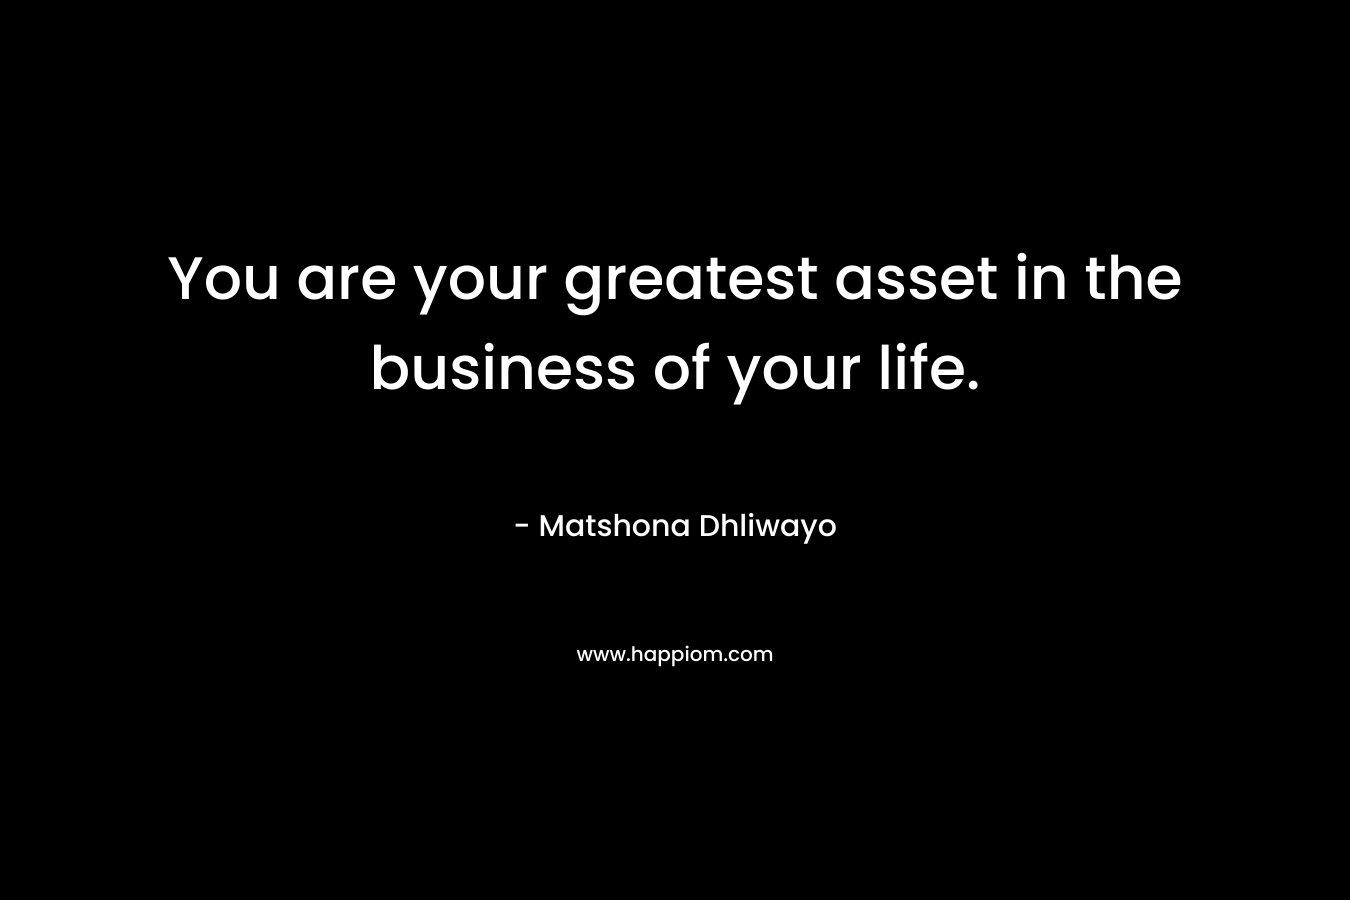 You are your greatest asset in the business of your life.